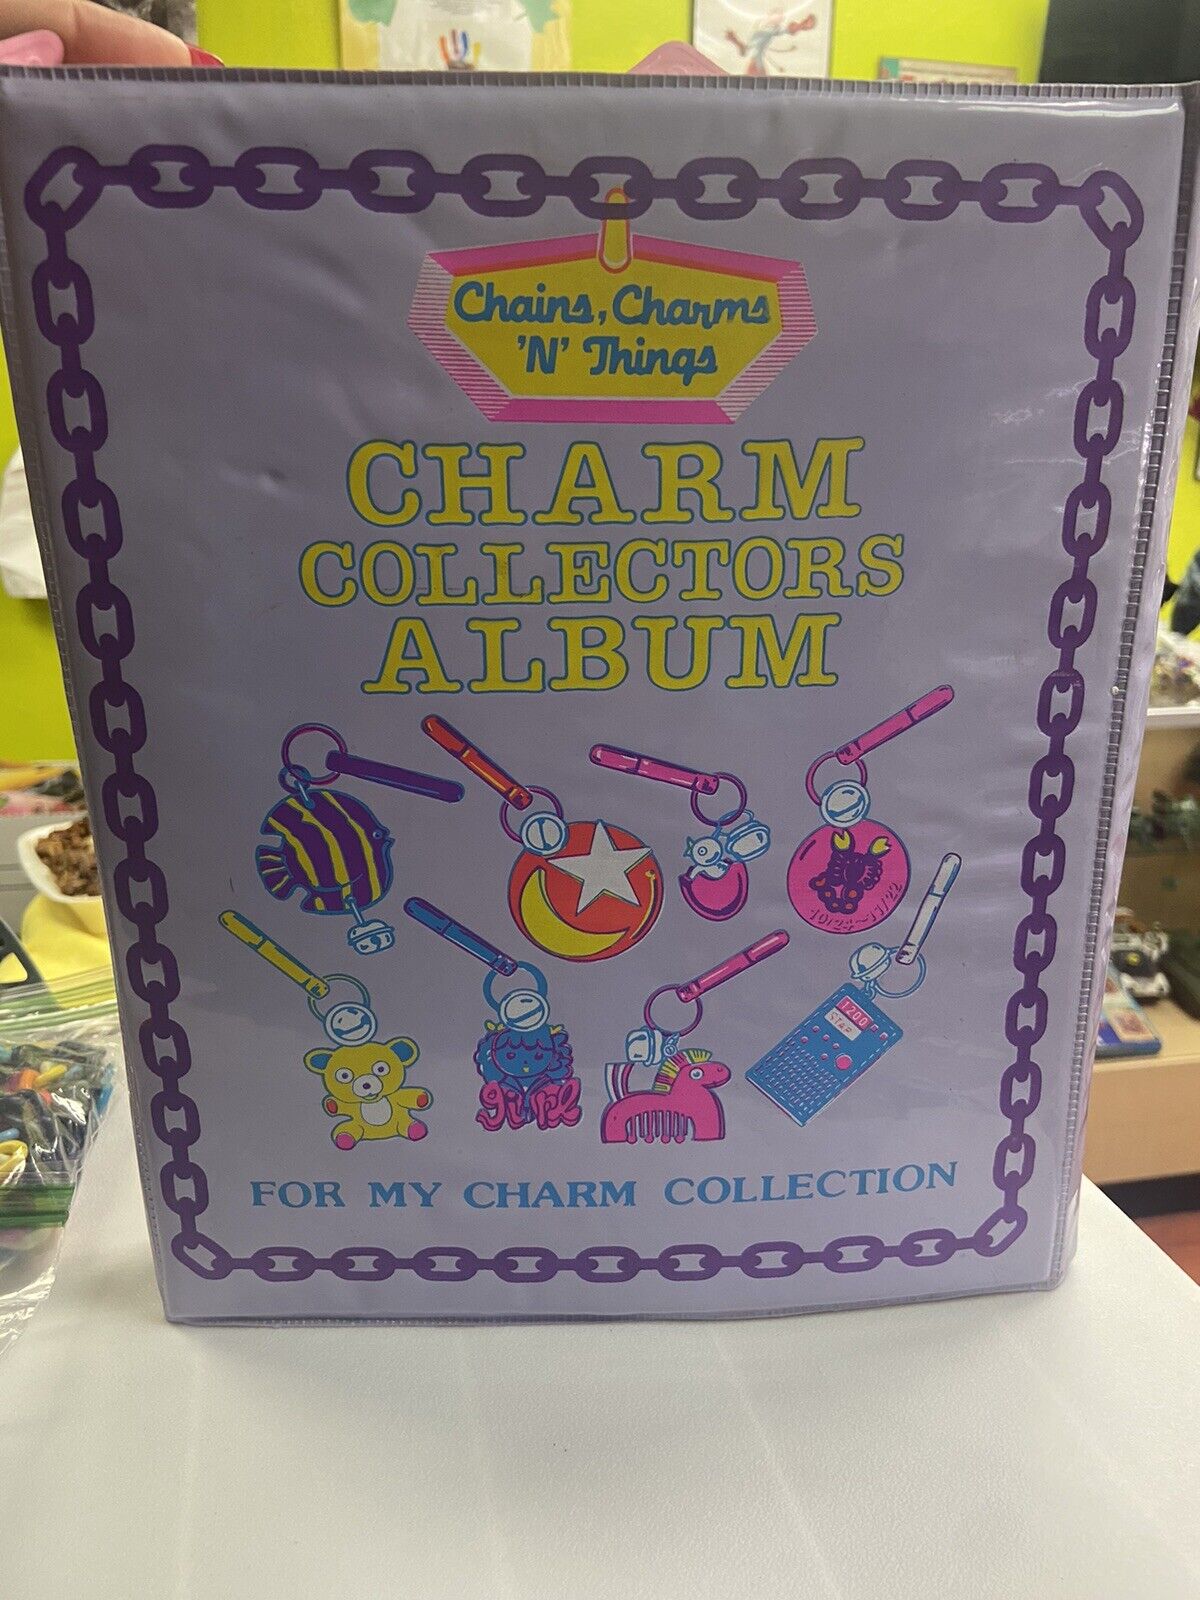 Vintage 1985 Imperial Charm Collectors Album Chains, Charms N’ Things Purple